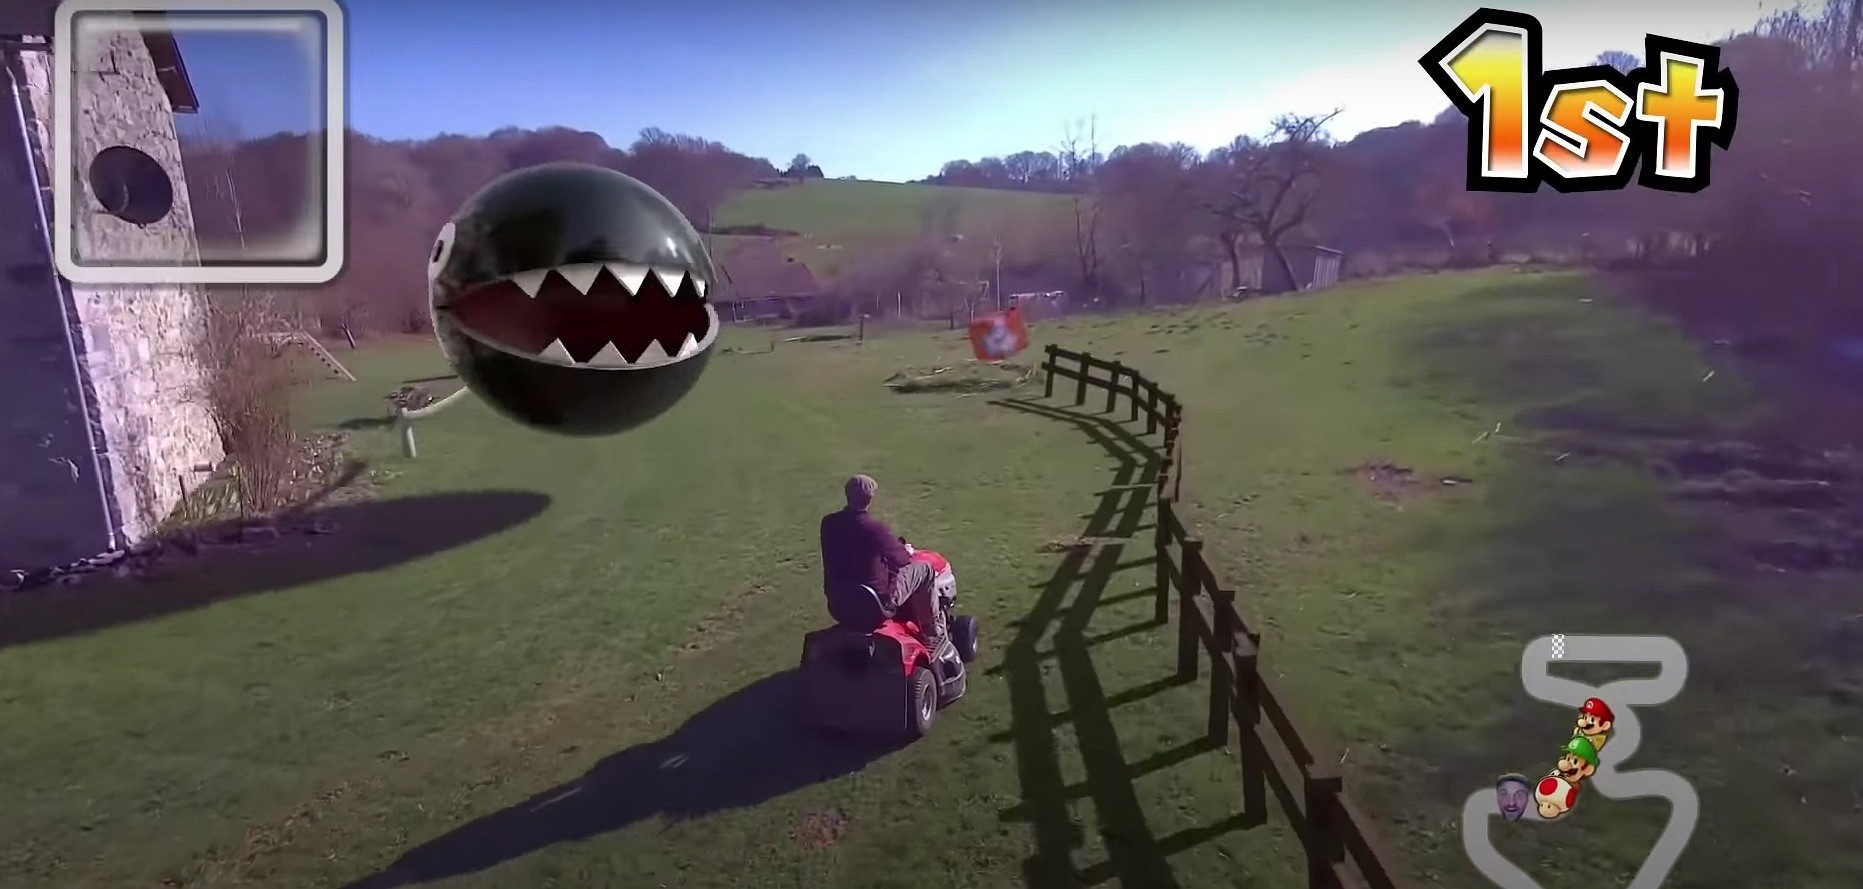 Guy Plays Real-Life Mario Kart With a Lawn Mower and a Skydio Drone -  autoevolution